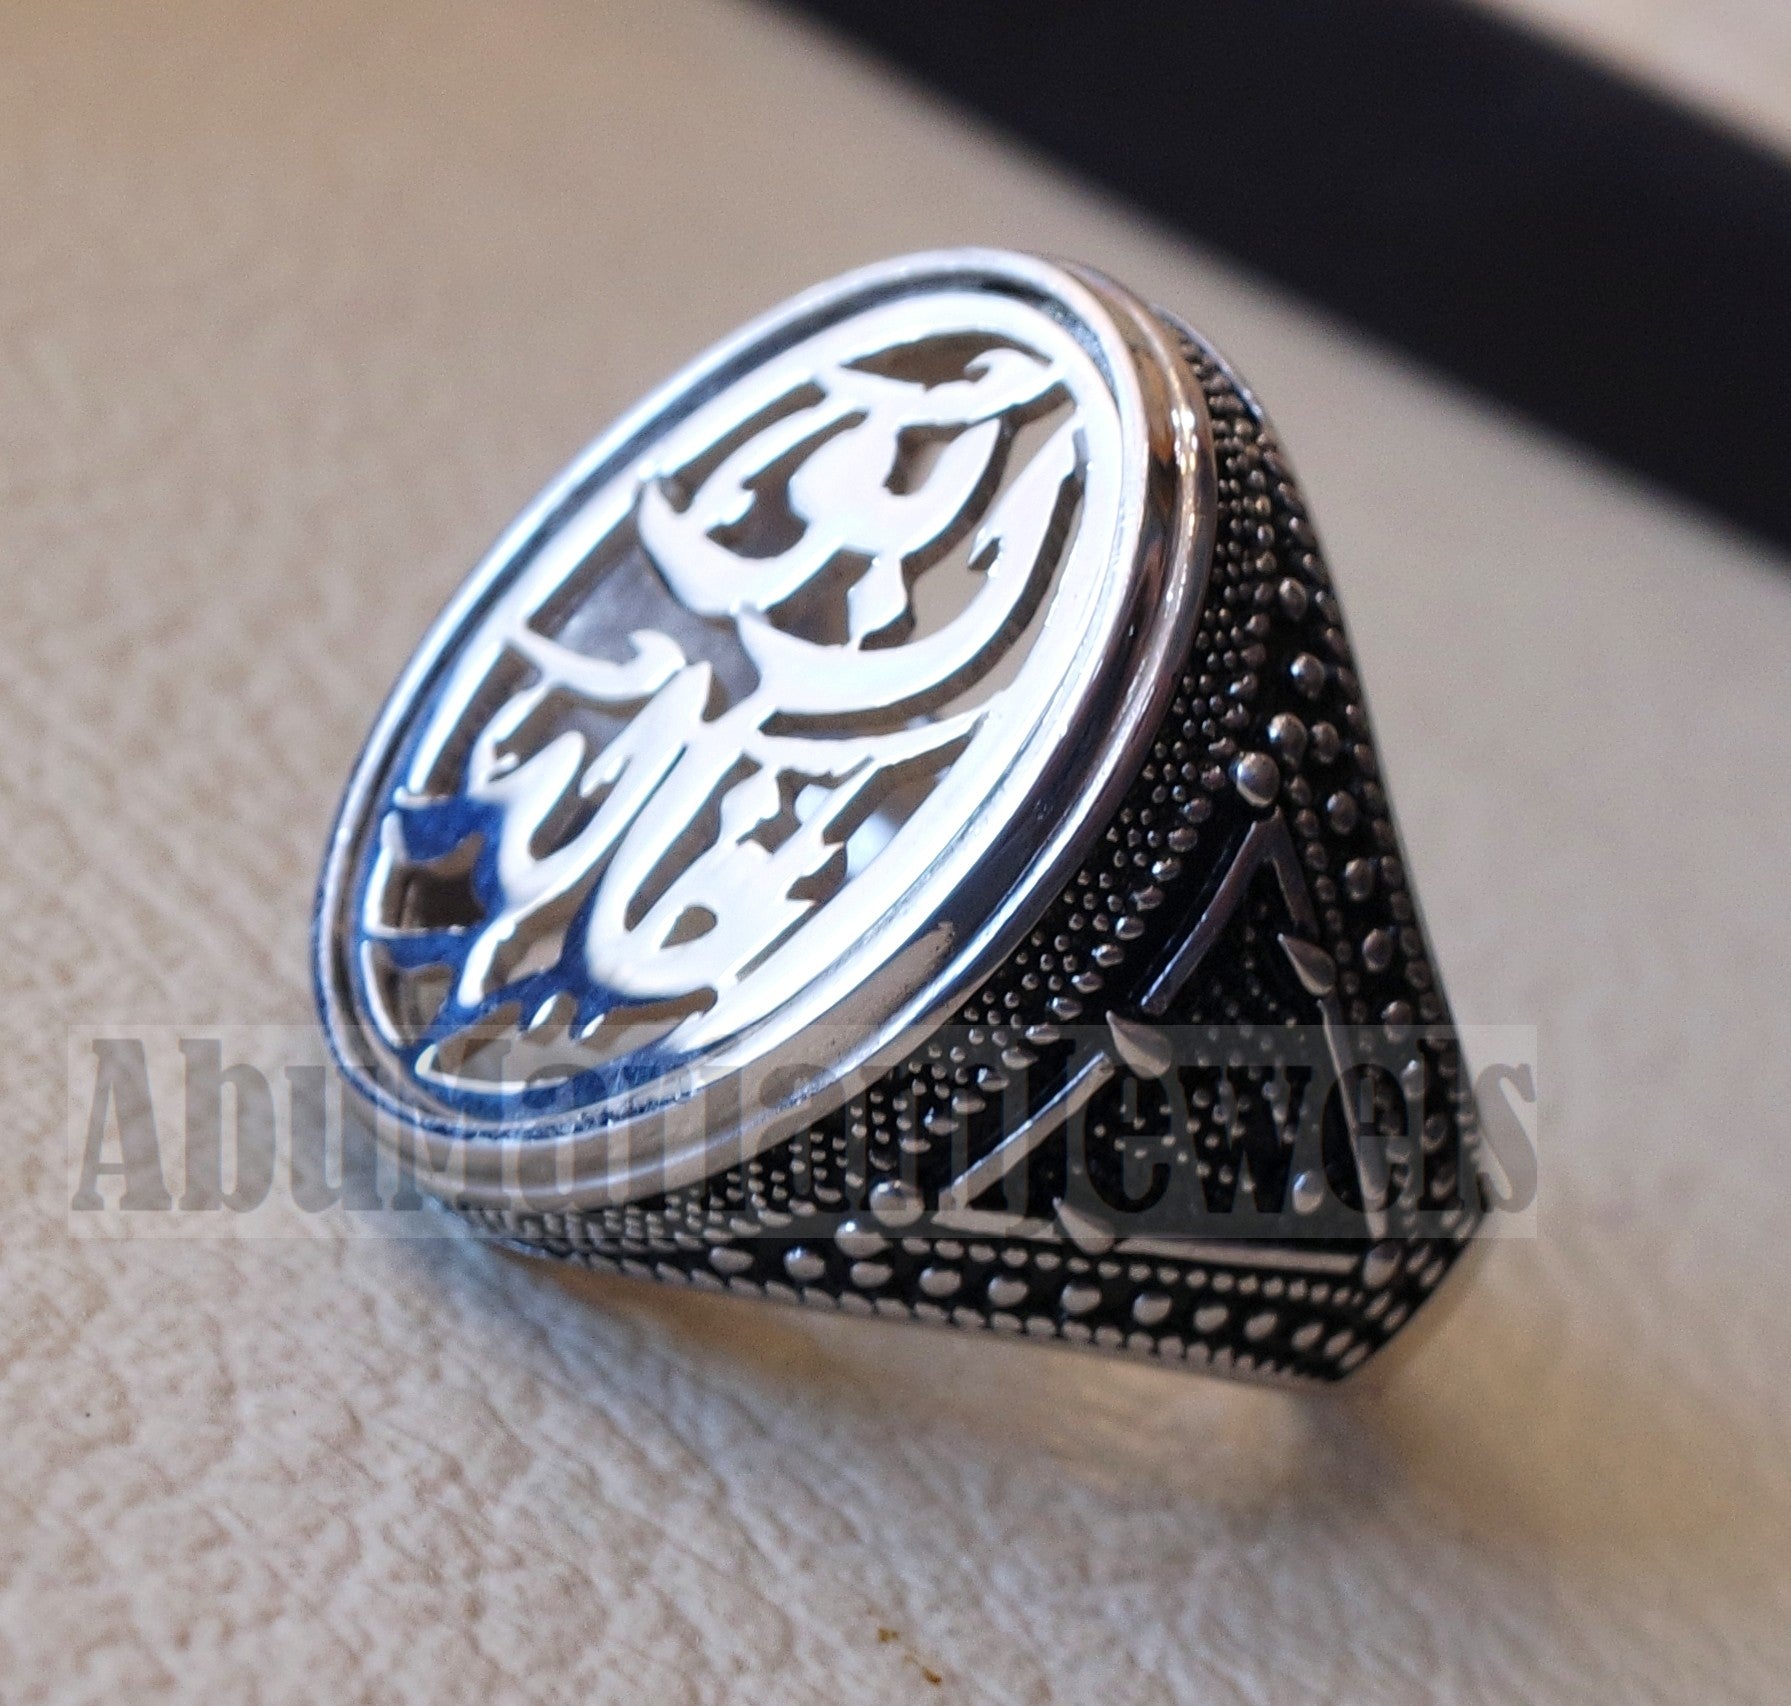 Customized Arabic calligraphy names ring personalized jewelry style sterling silver 925  any size TSN1004 خاتم اسم تفصيل